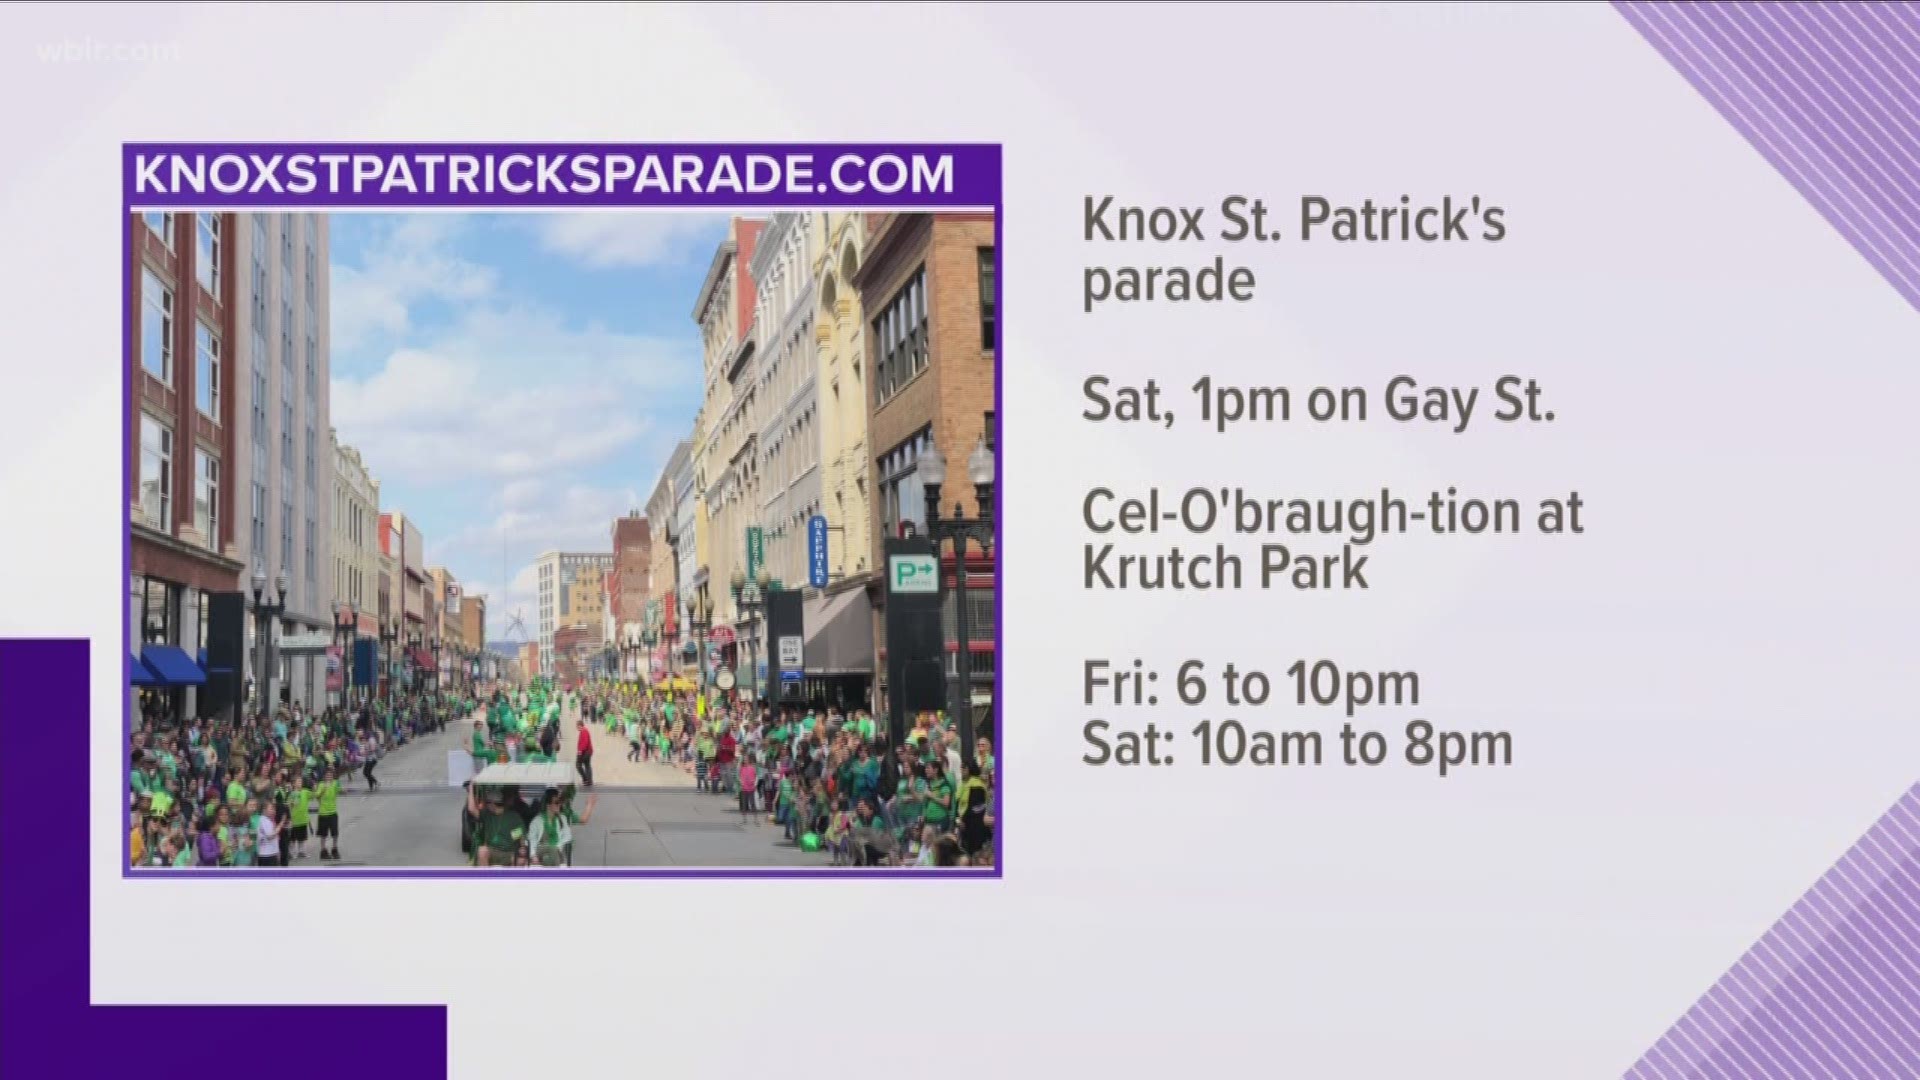 The Knox St. Patrick's Parade is Saturday at 1pm down Gay St.. There's also a Cel-O'braught-tion at Krutch Park for 6 to 10 on Friday and 10am to 8pm on Saturday. All of it will benefit Catholic Charities of East Tennessee. Visit  knoxstpatricksparade.com. March 14, 2019-4pm